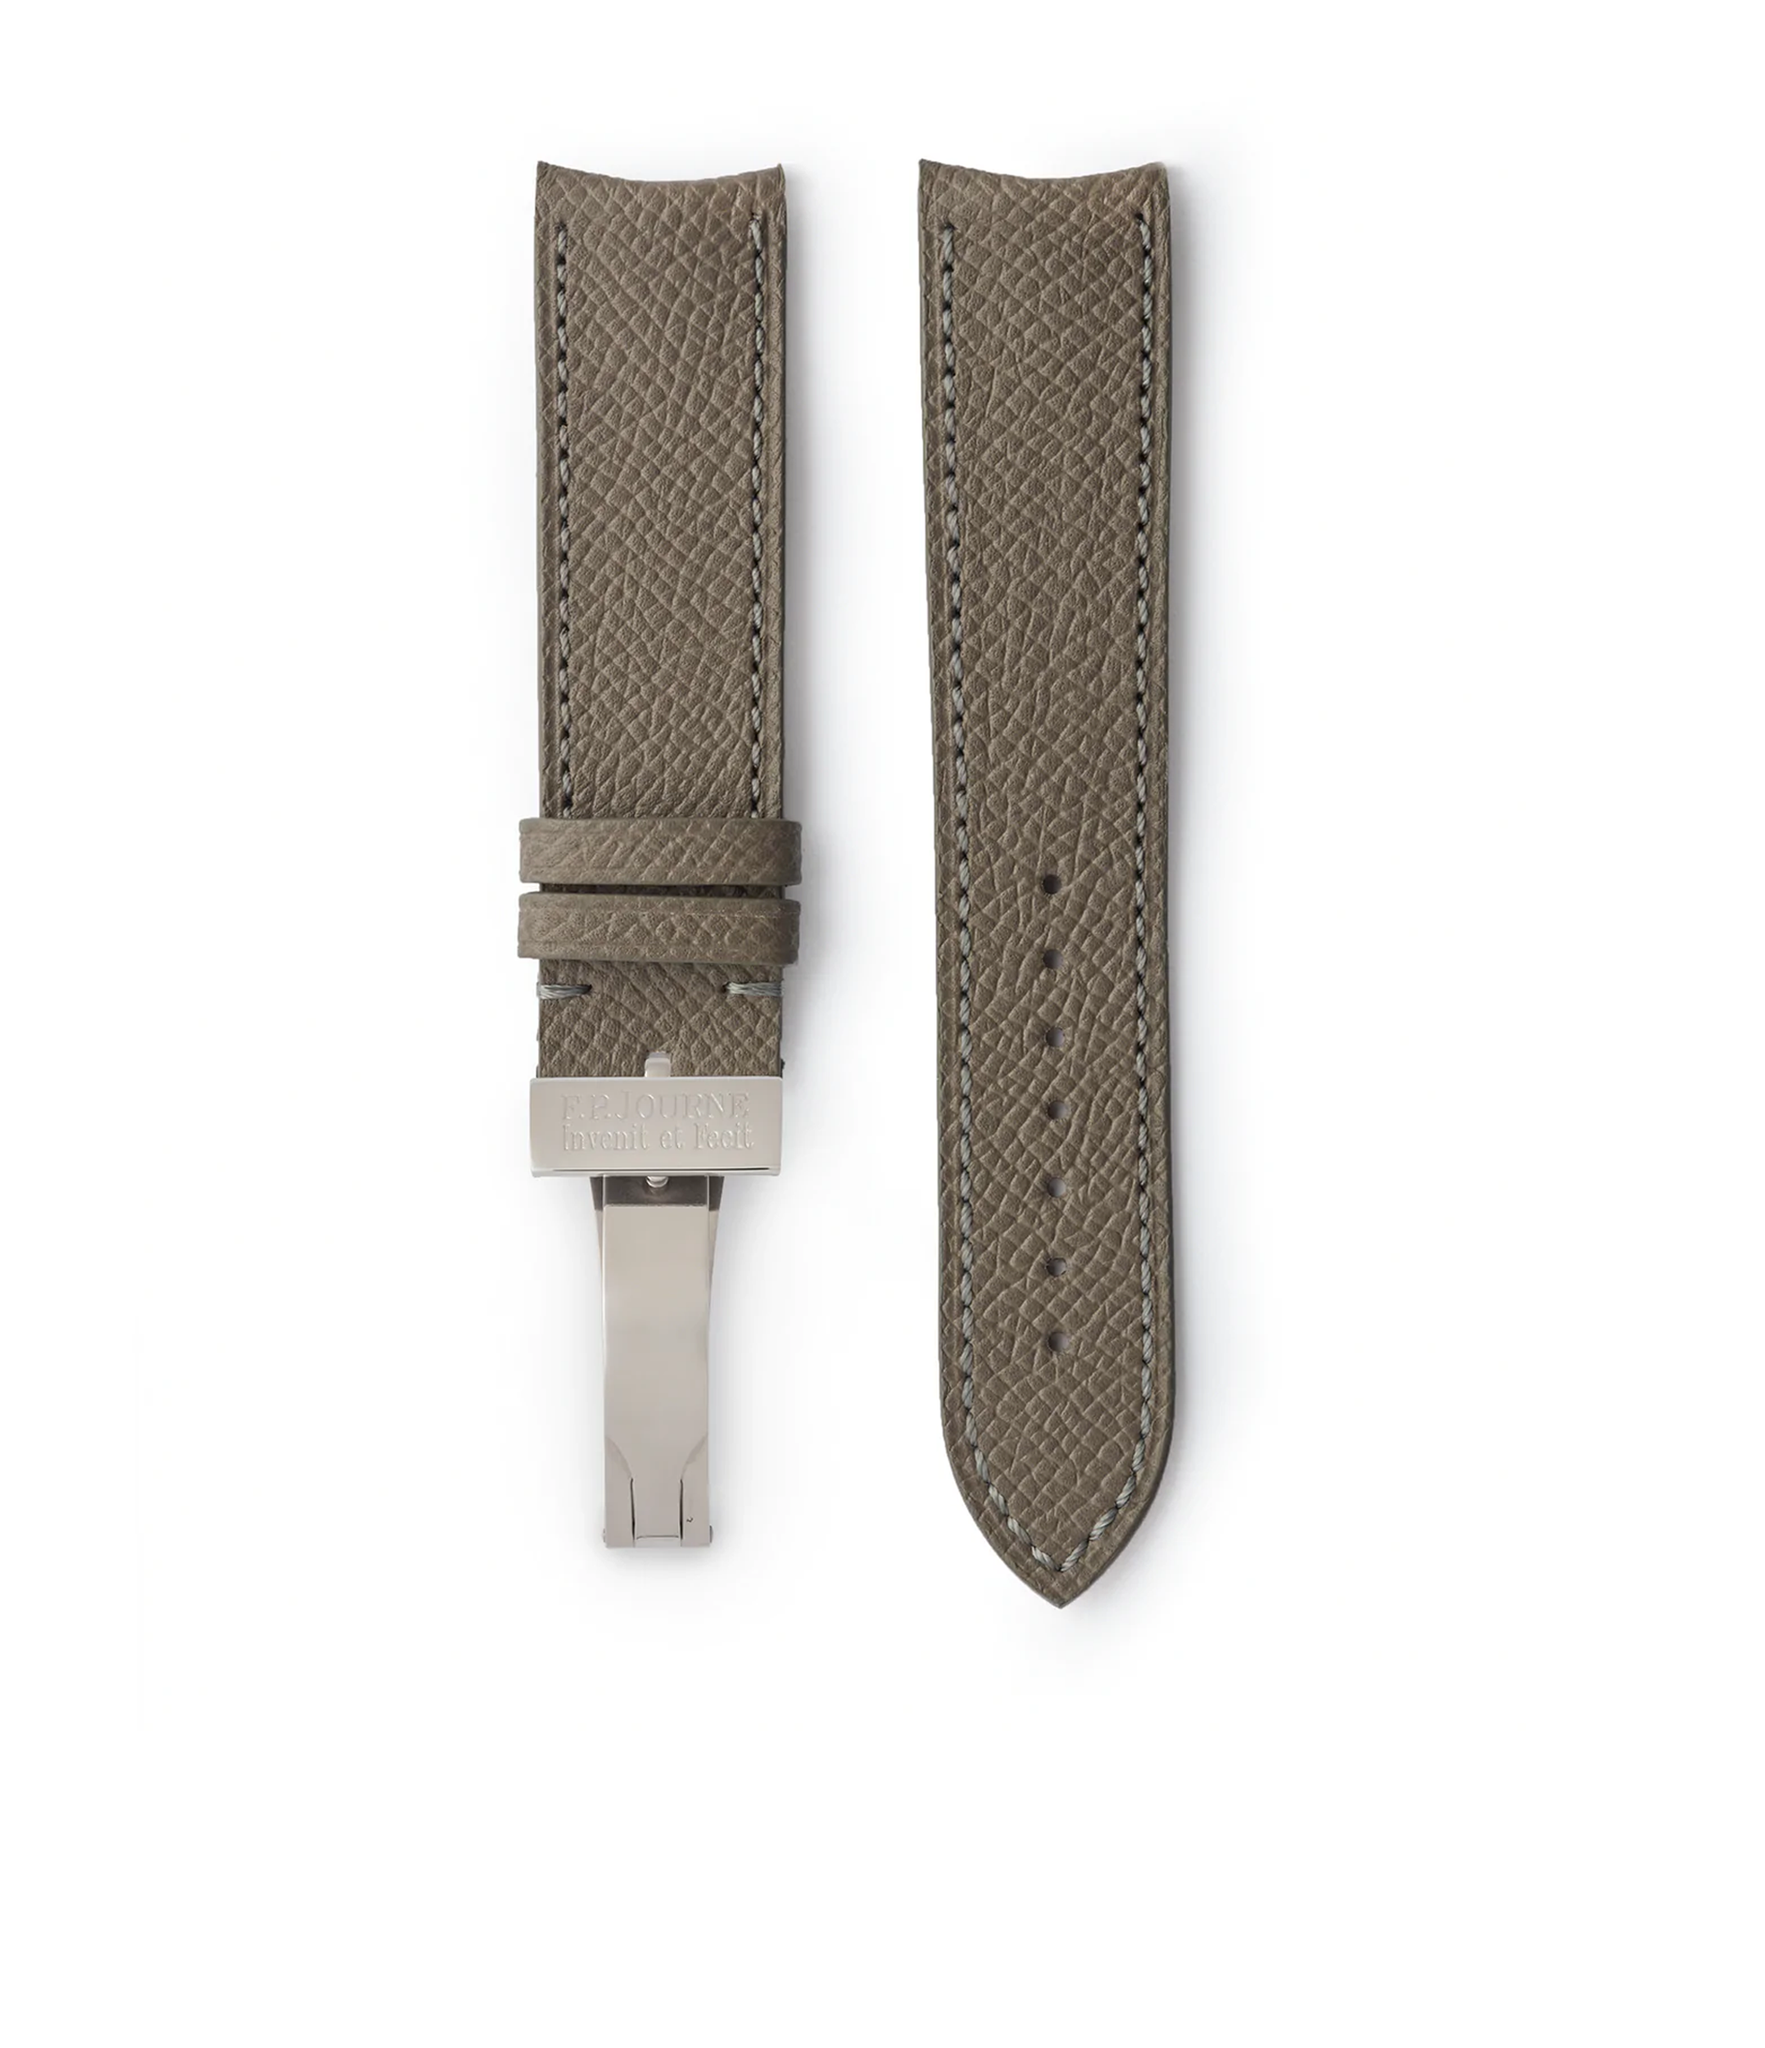 Buy grained leather quality watch strap in smoky ash grey from A Collected Man London, in short or regular lengths. We are proud to offer these hand-crafted watch straps, thoughtfully made in Europe, to suit your watch. Available to order online for worldwide delivery.